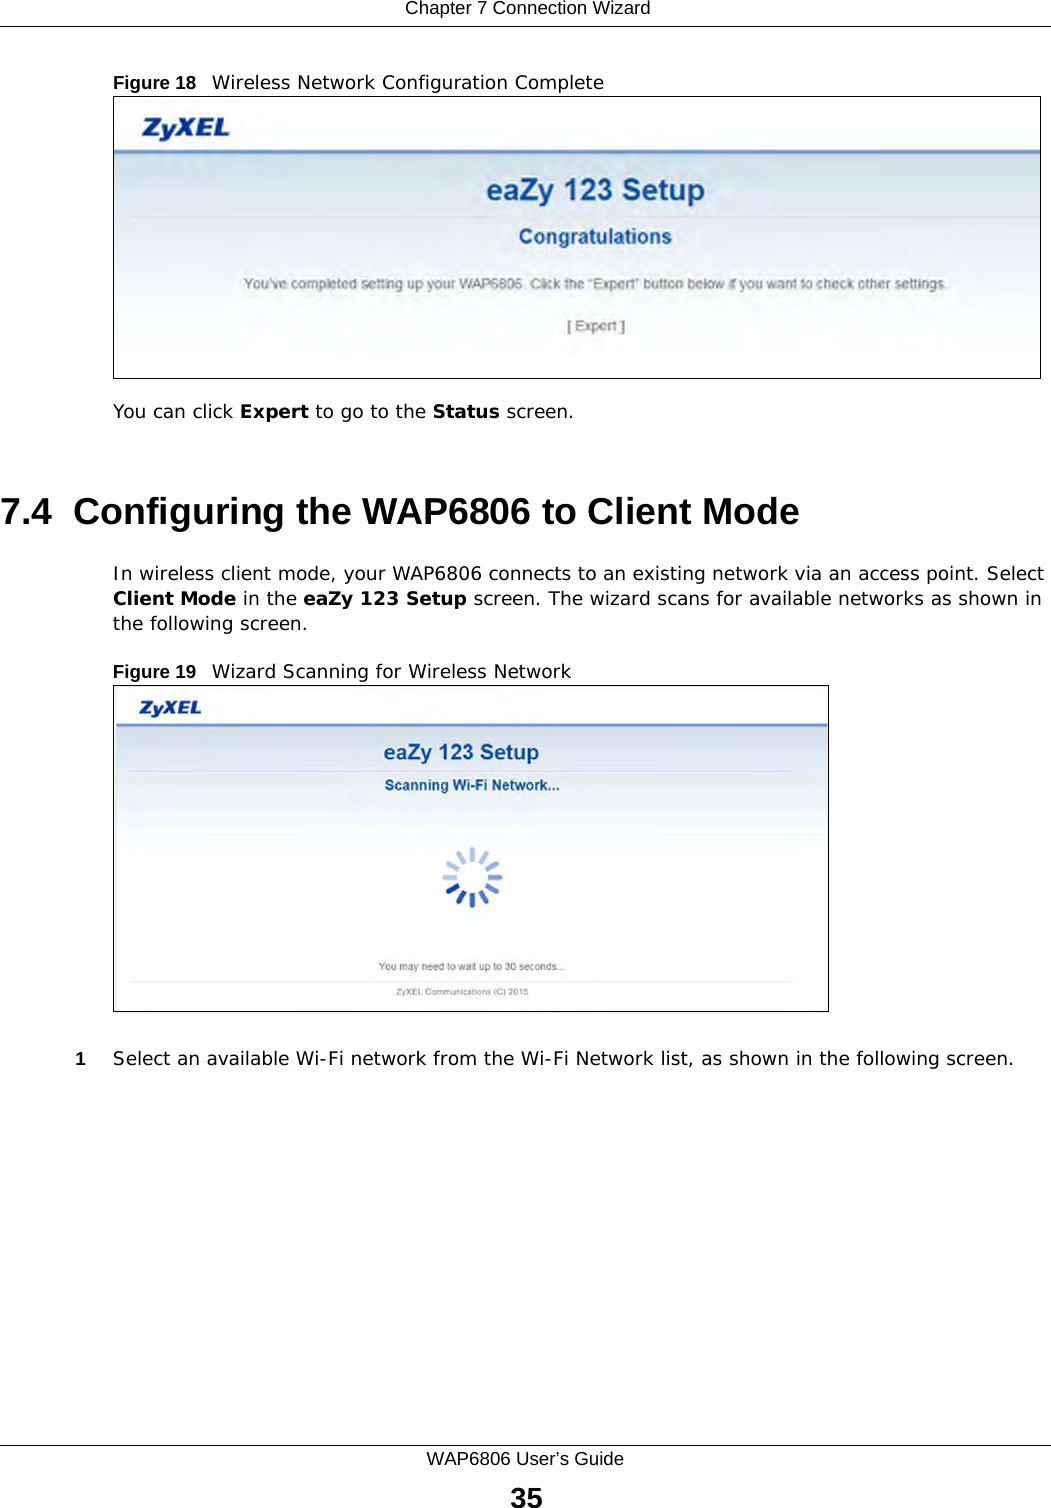  Chapter 7 Connection WizardWAP6806 User’s Guide35Figure 18   Wireless Network Configuration CompleteYou can click Expert to go to the Status screen.7.4  Configuring the WAP6806 to Client ModeIn wireless client mode, your WAP6806 connects to an existing network via an access point. Select Client Mode in the eaZy 123 Setup screen. The wizard scans for available networks as shown in the following screen. Figure 19   Wizard Scanning for Wireless Network1Select an available Wi-Fi network from the Wi-Fi Network list, as shown in the following screen.